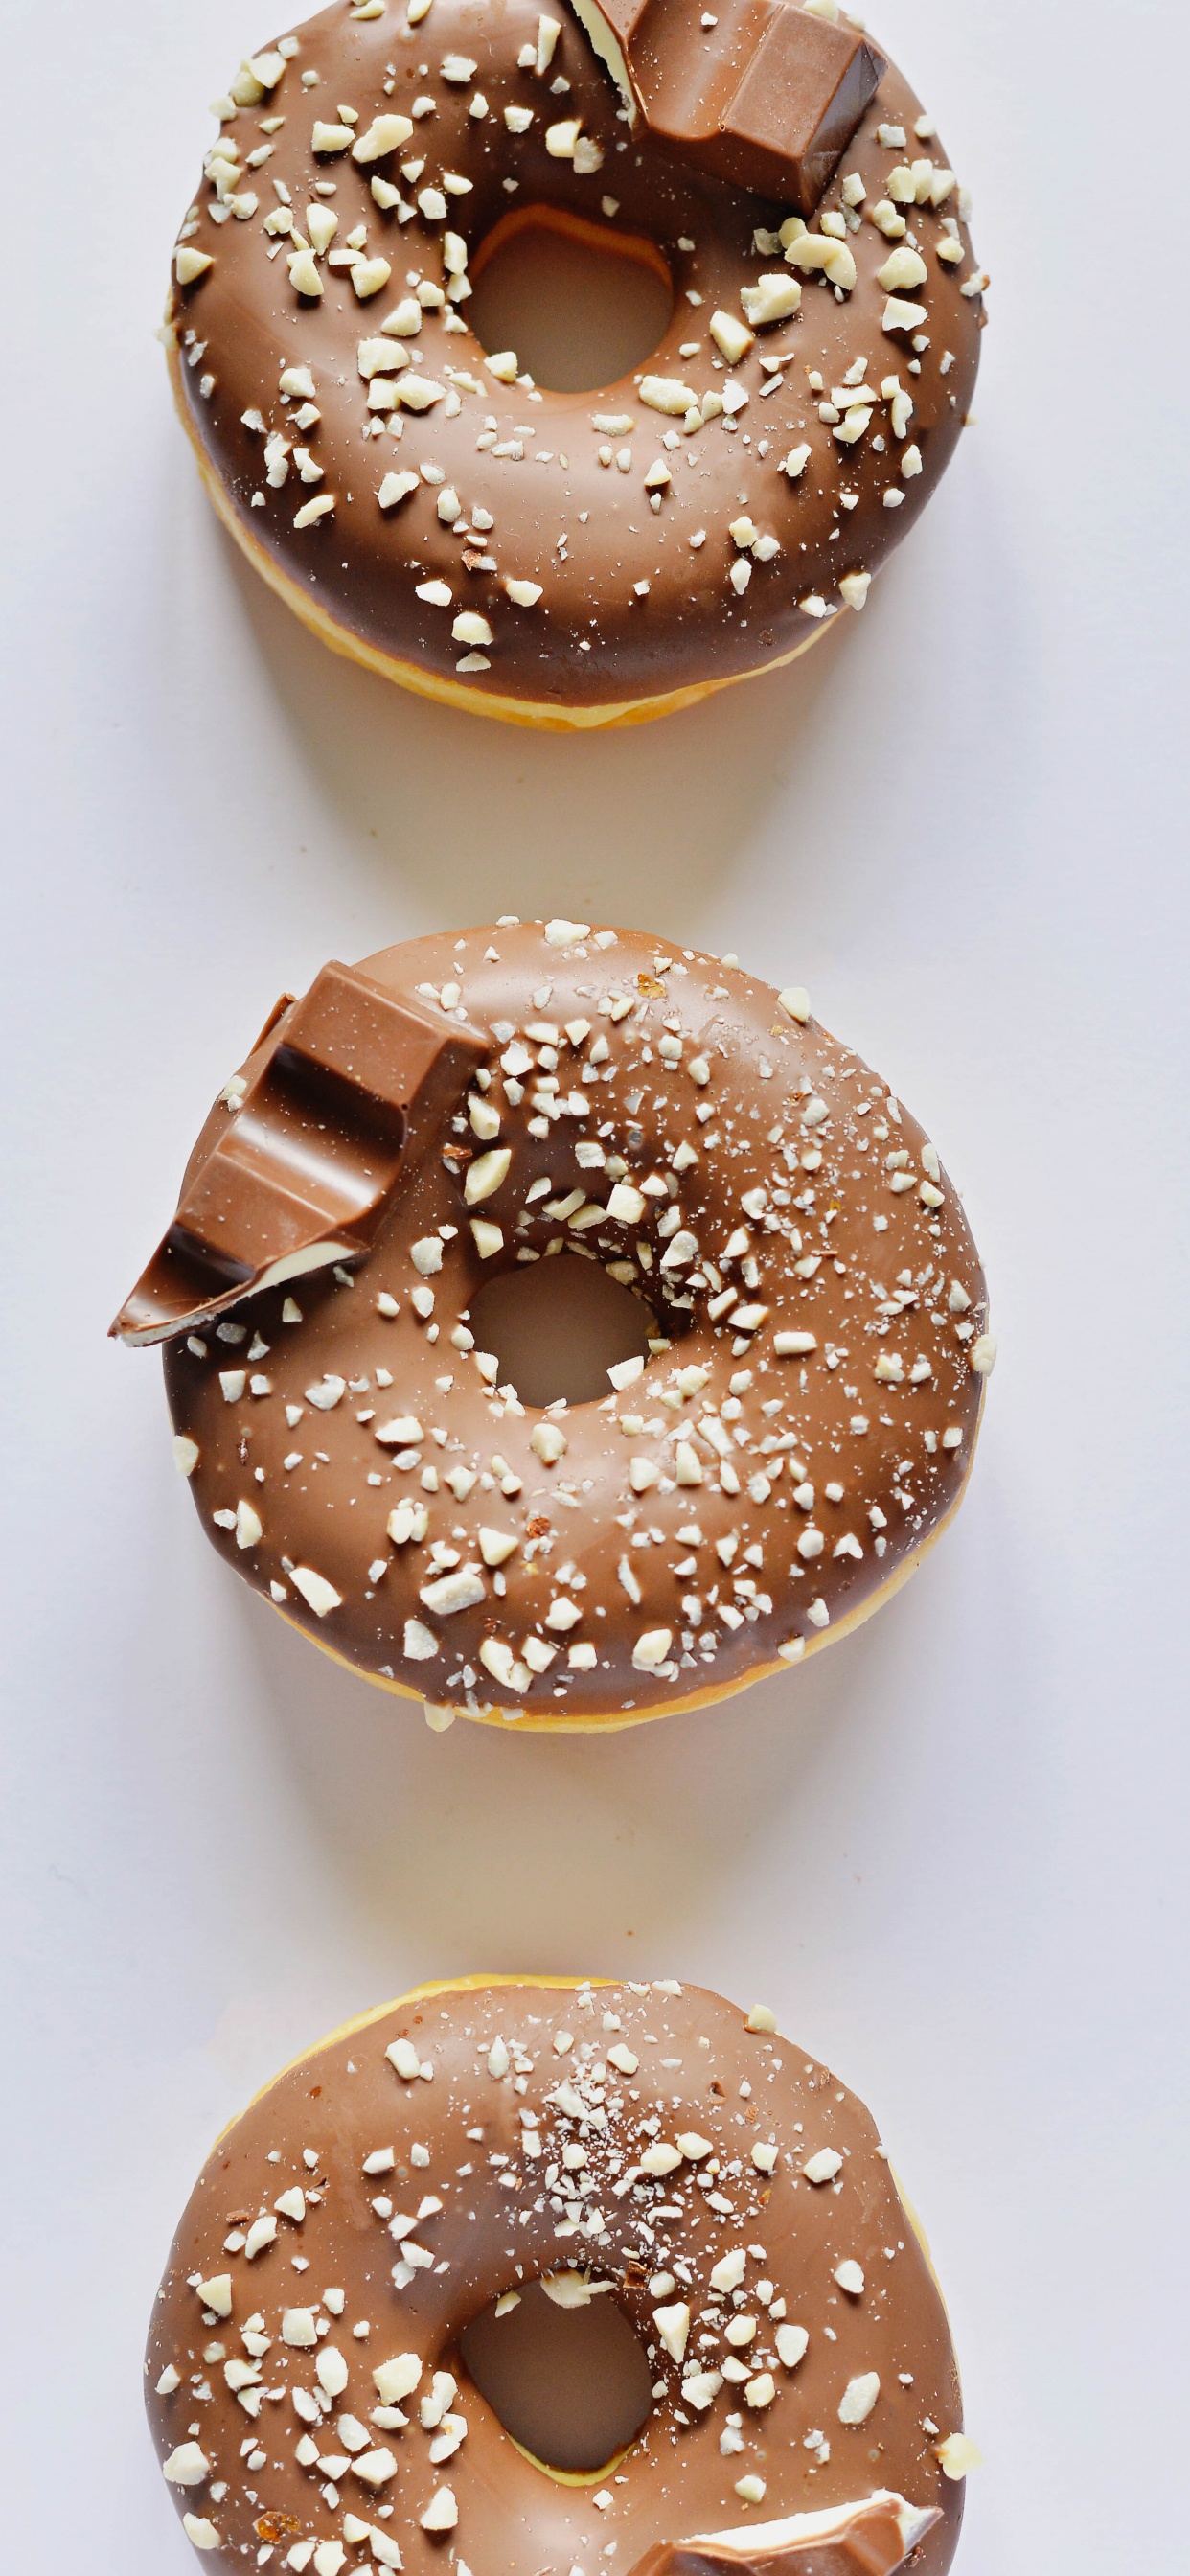 Brown Donut on White Table. Wallpaper in 1242x2688 Resolution